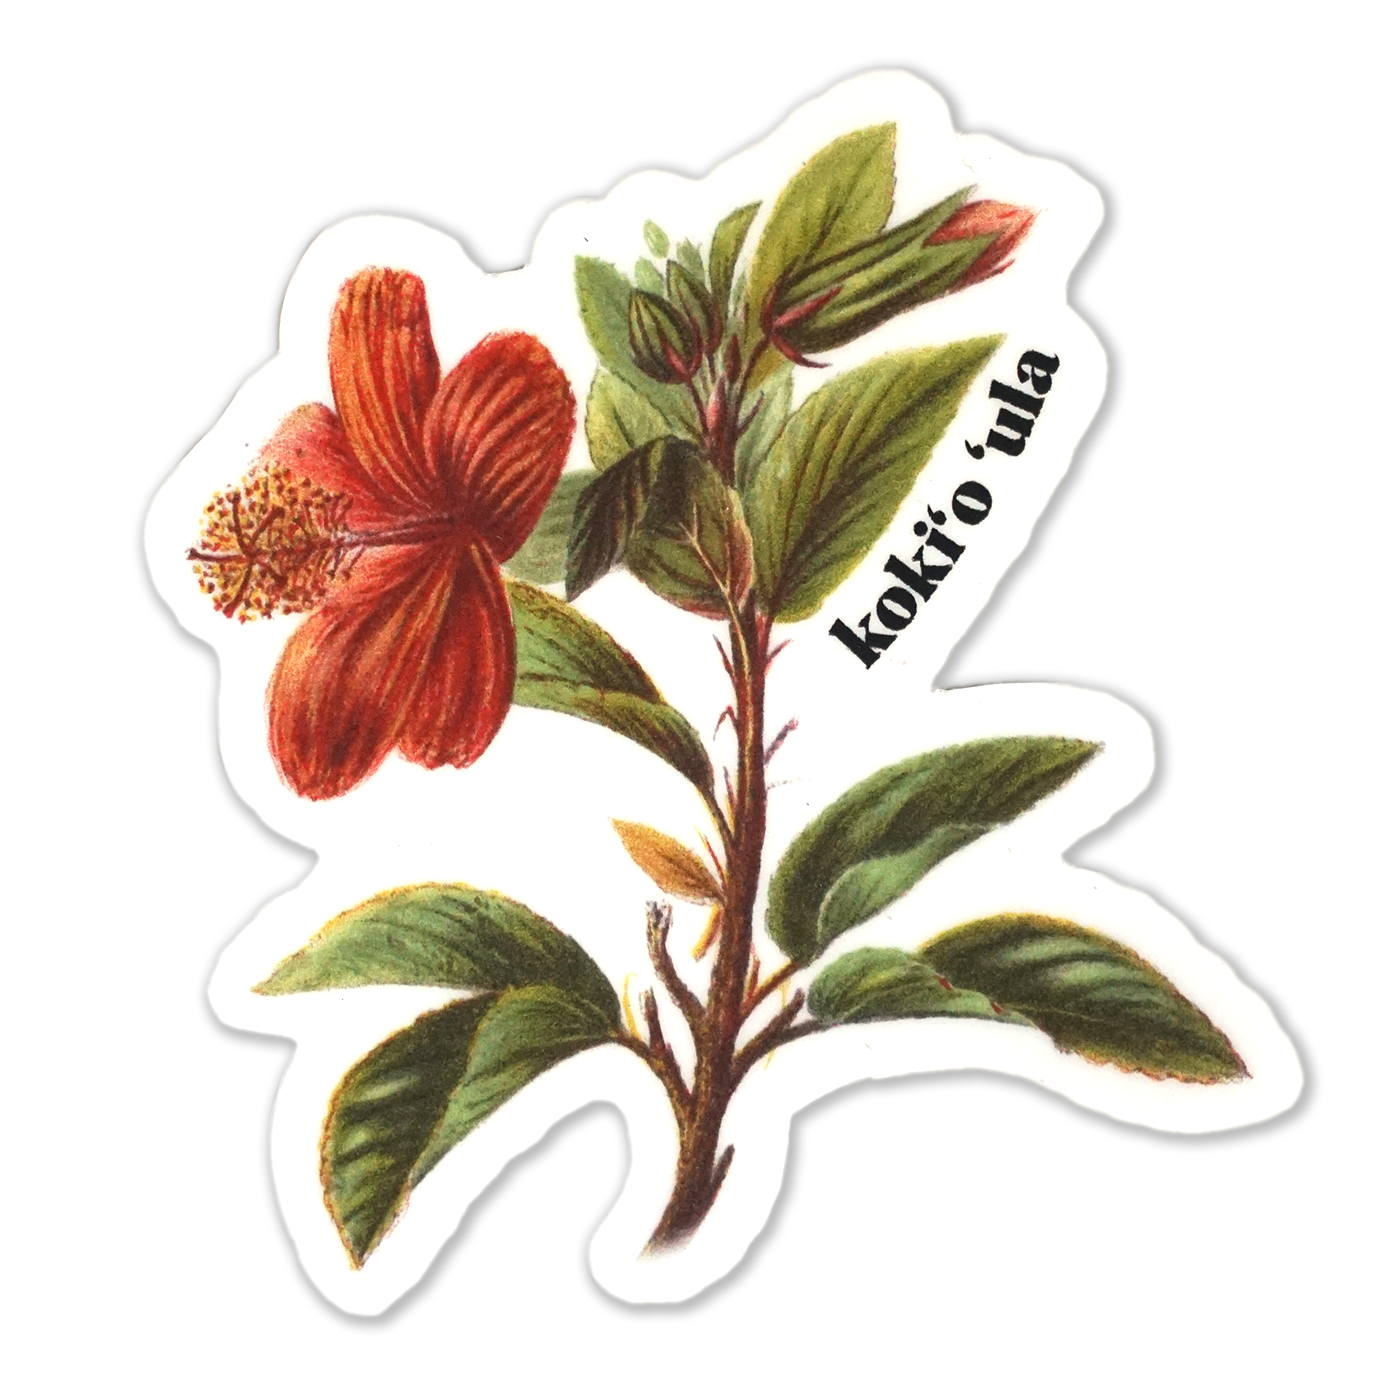 This red Hawaiian hibiscus, kokiʻo ʻula, is a rare and endemic species. These bright and beautiful tropical flowers were once more common throughout the islands prior to development and human impacts.